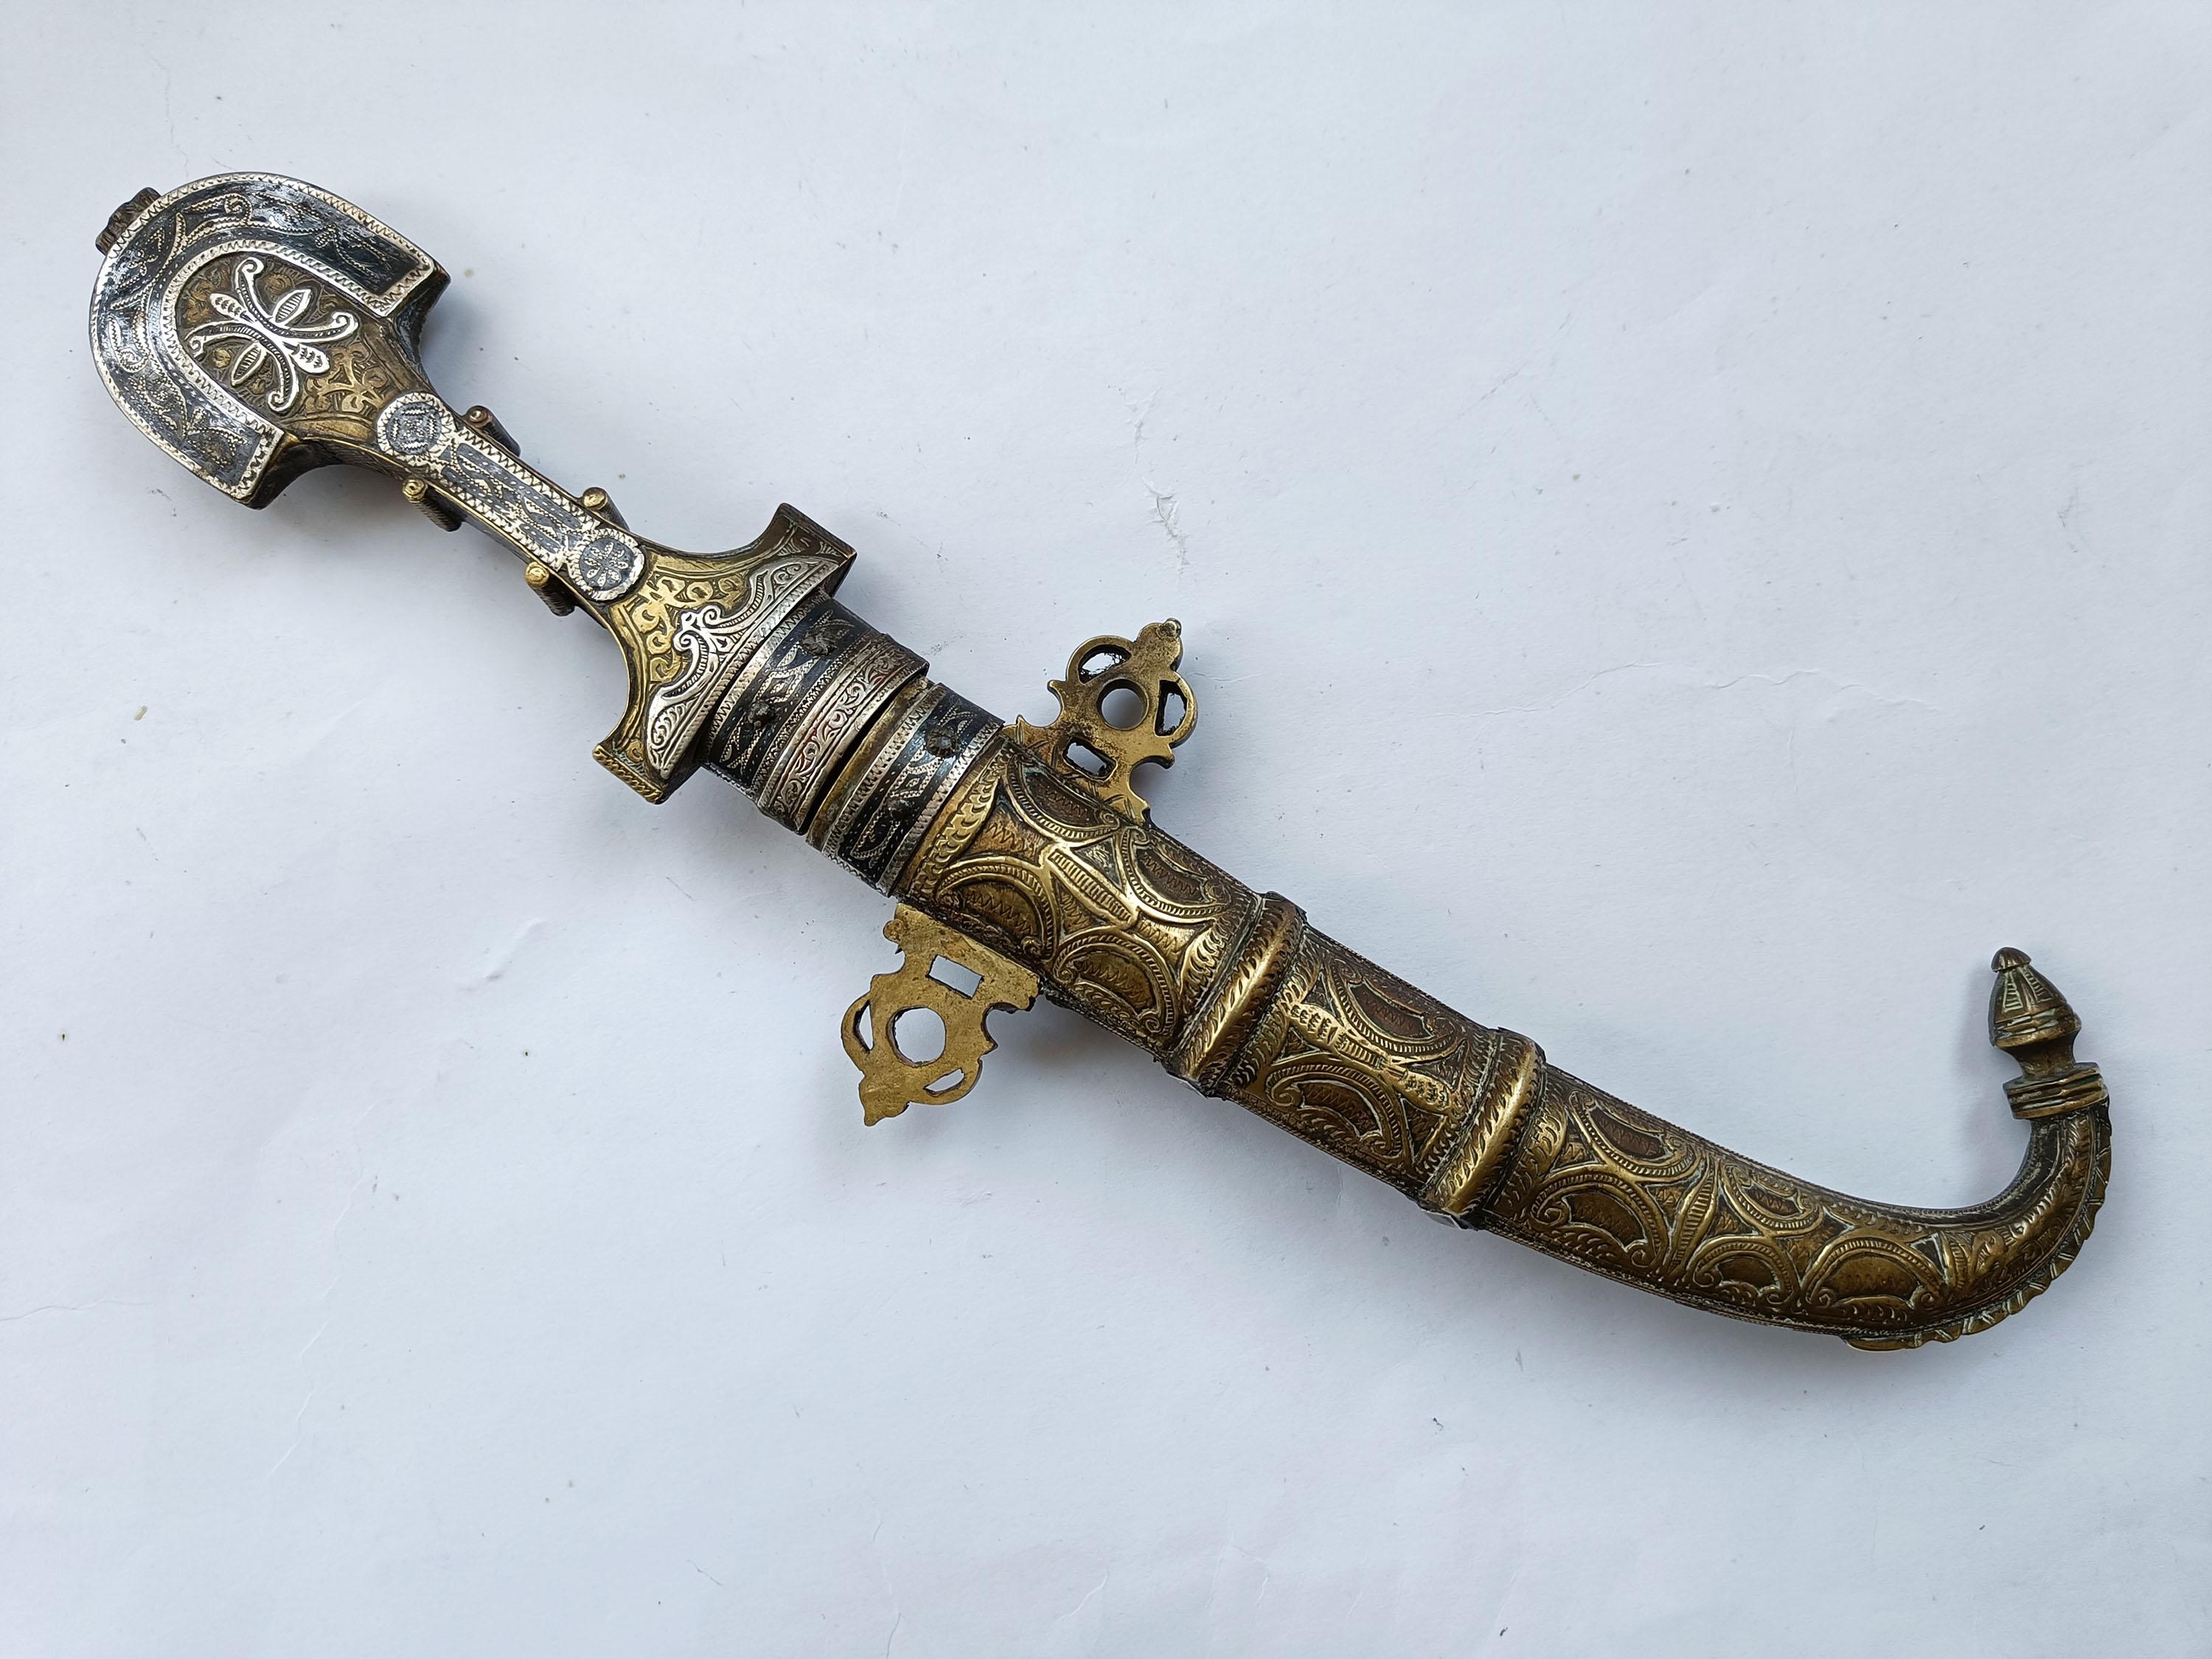 Superb Antique Moroccan Koumiya Berber Dagger 19th c Islamic arts In Good Condition For Sale In London, GB